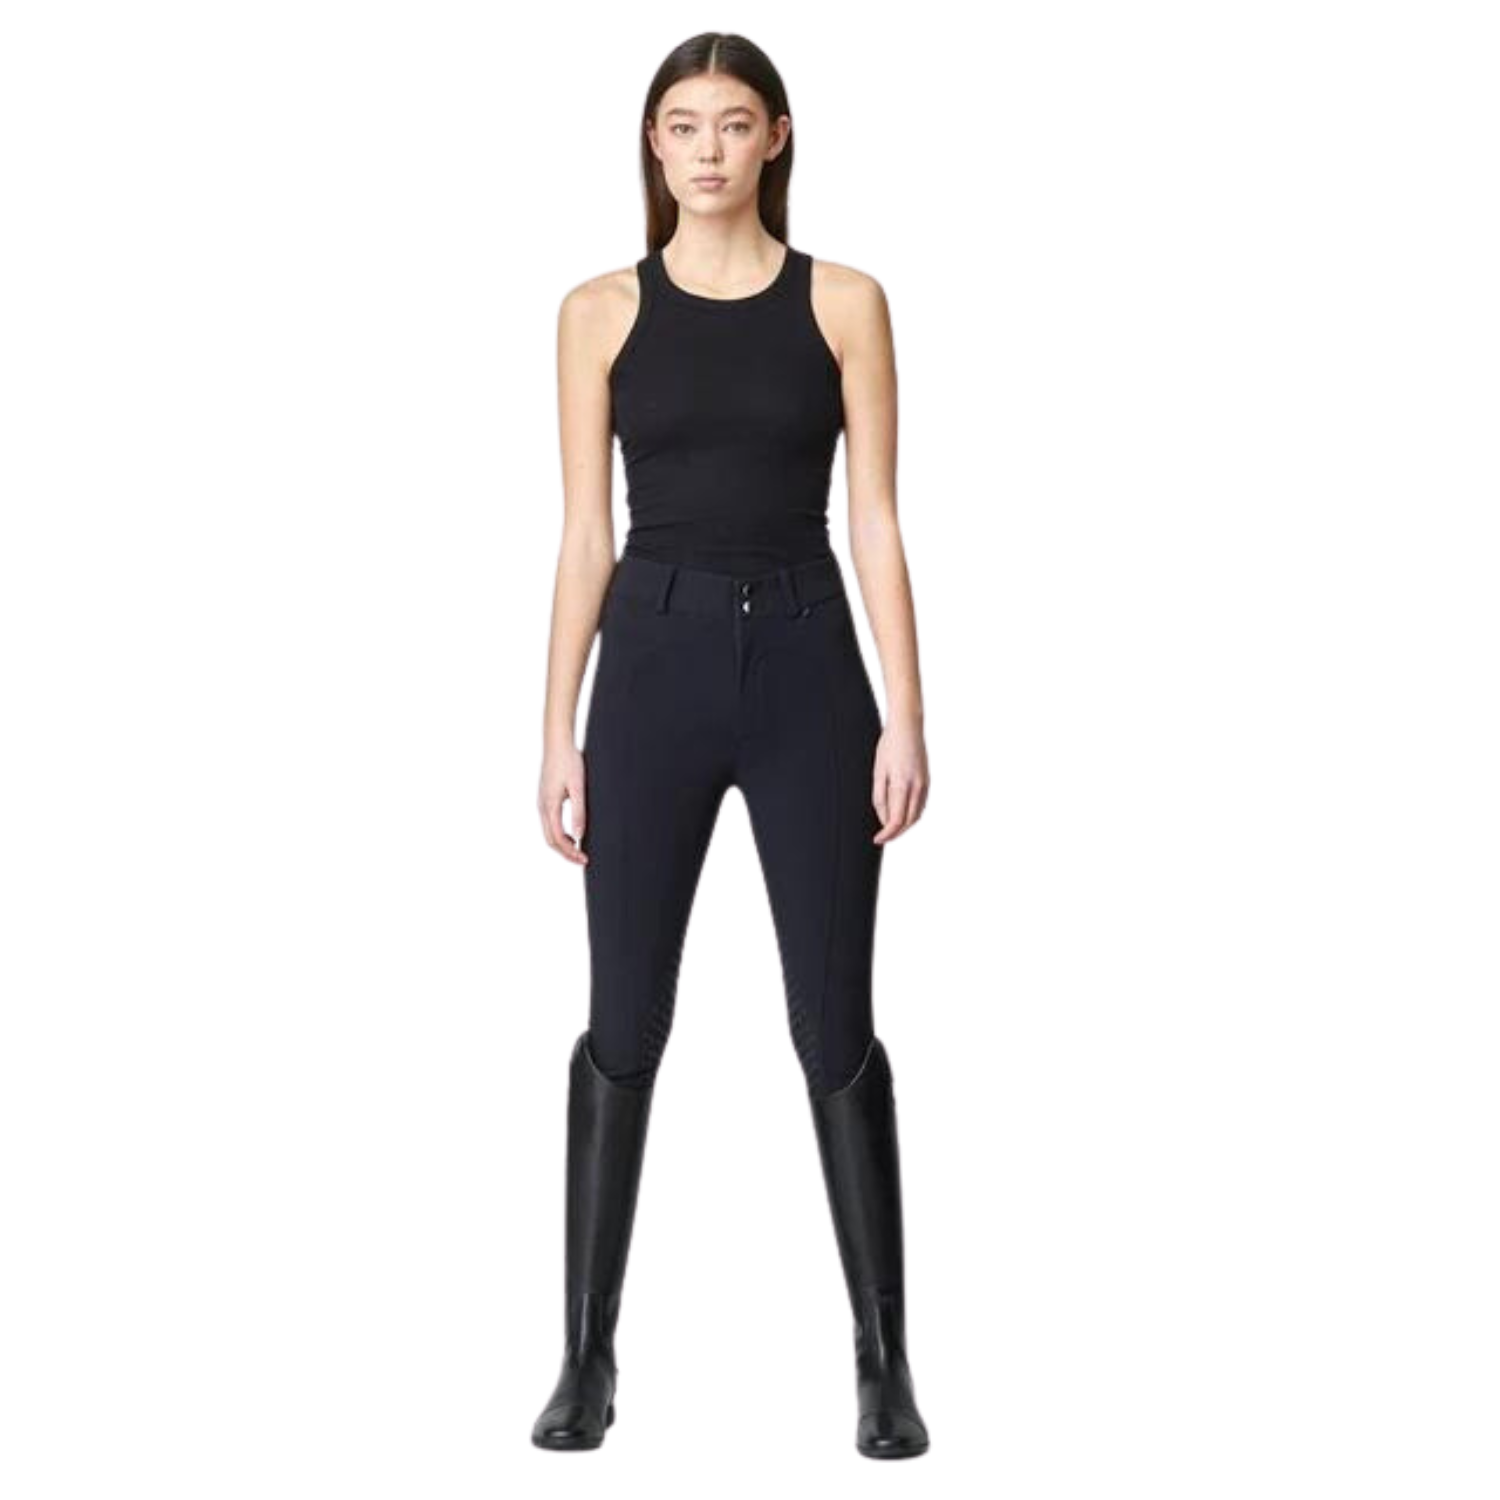 Ladies Extra High-Rise Compression Knee Grip Breeches - Black (LAST ONE - X-Small - IT38 - UK6)